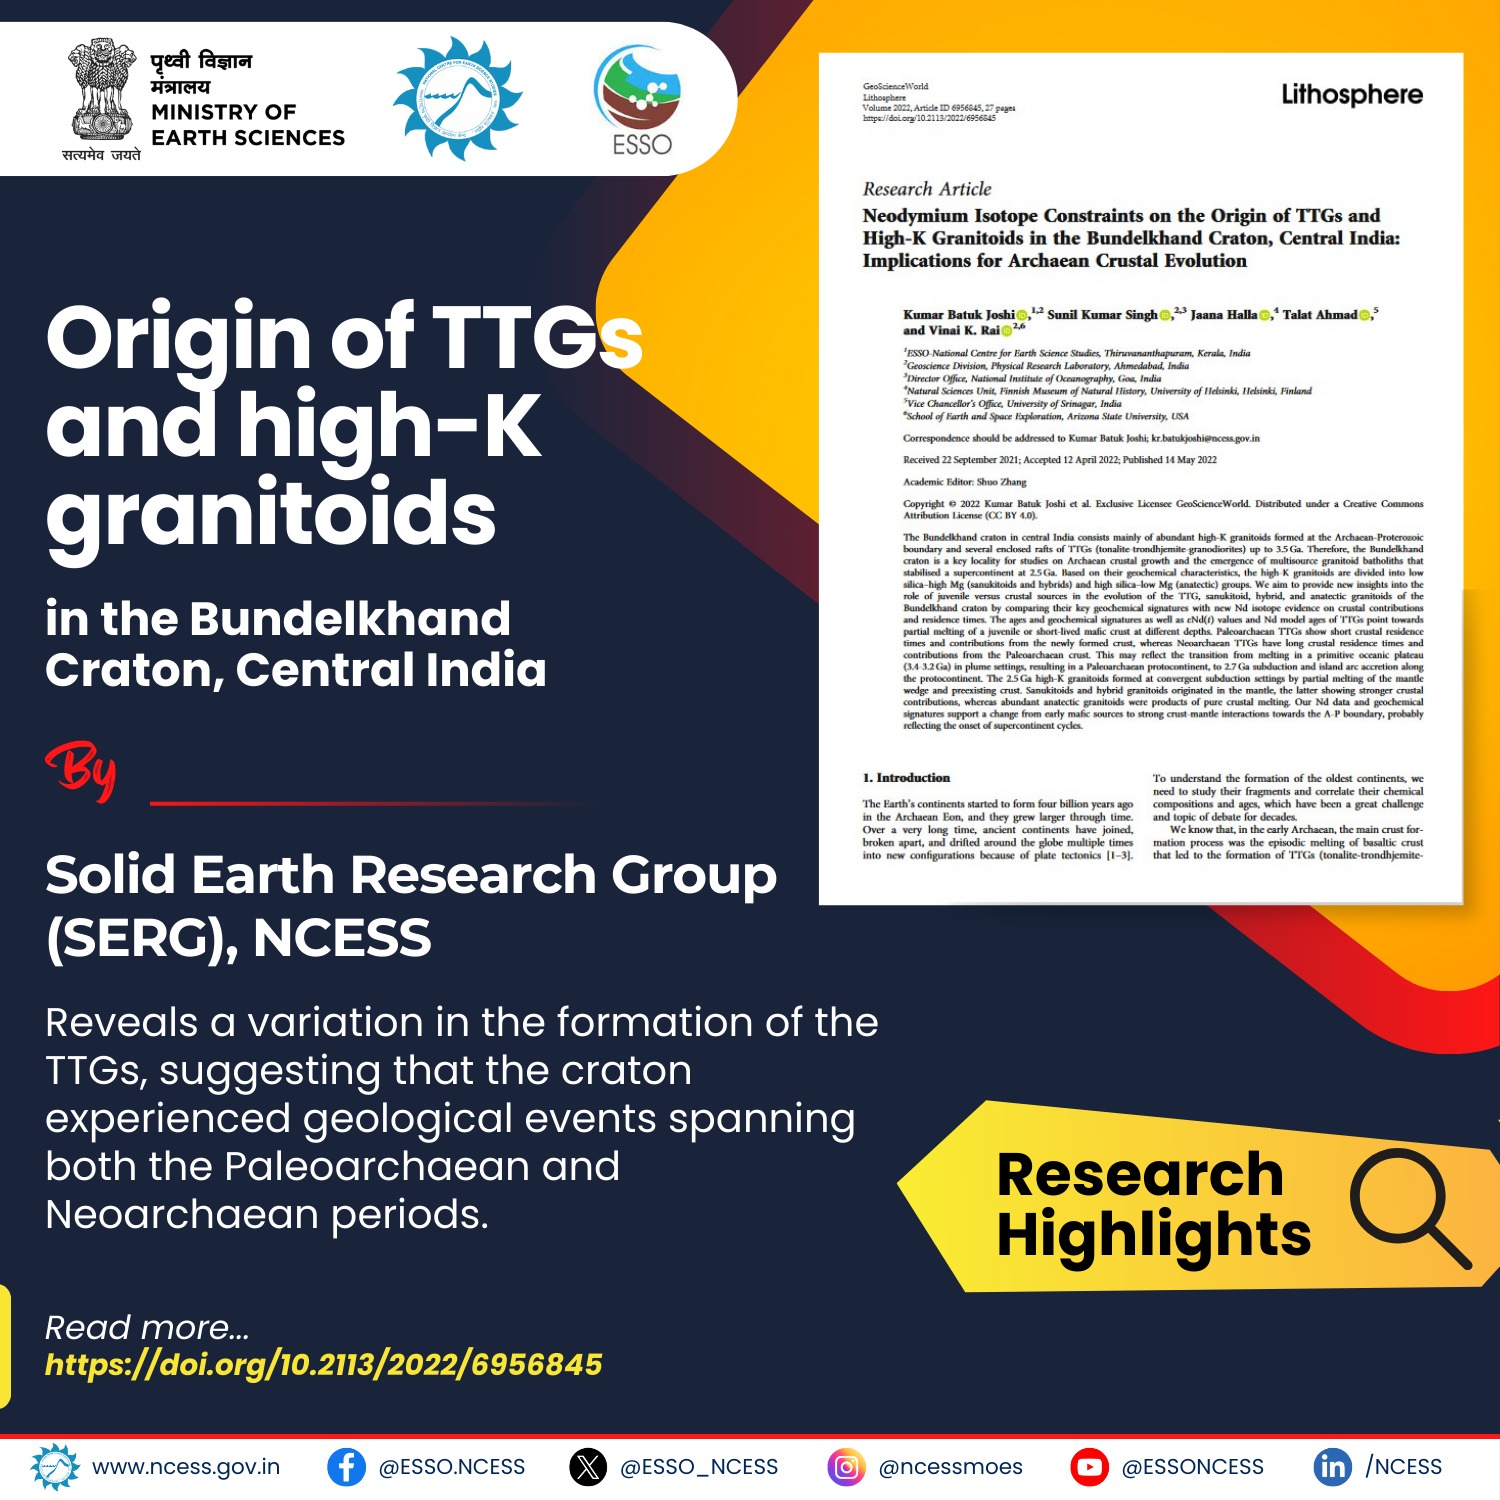 Origin of TTGs and high-K granitoids in the Bundelkhand Craton, Central India 